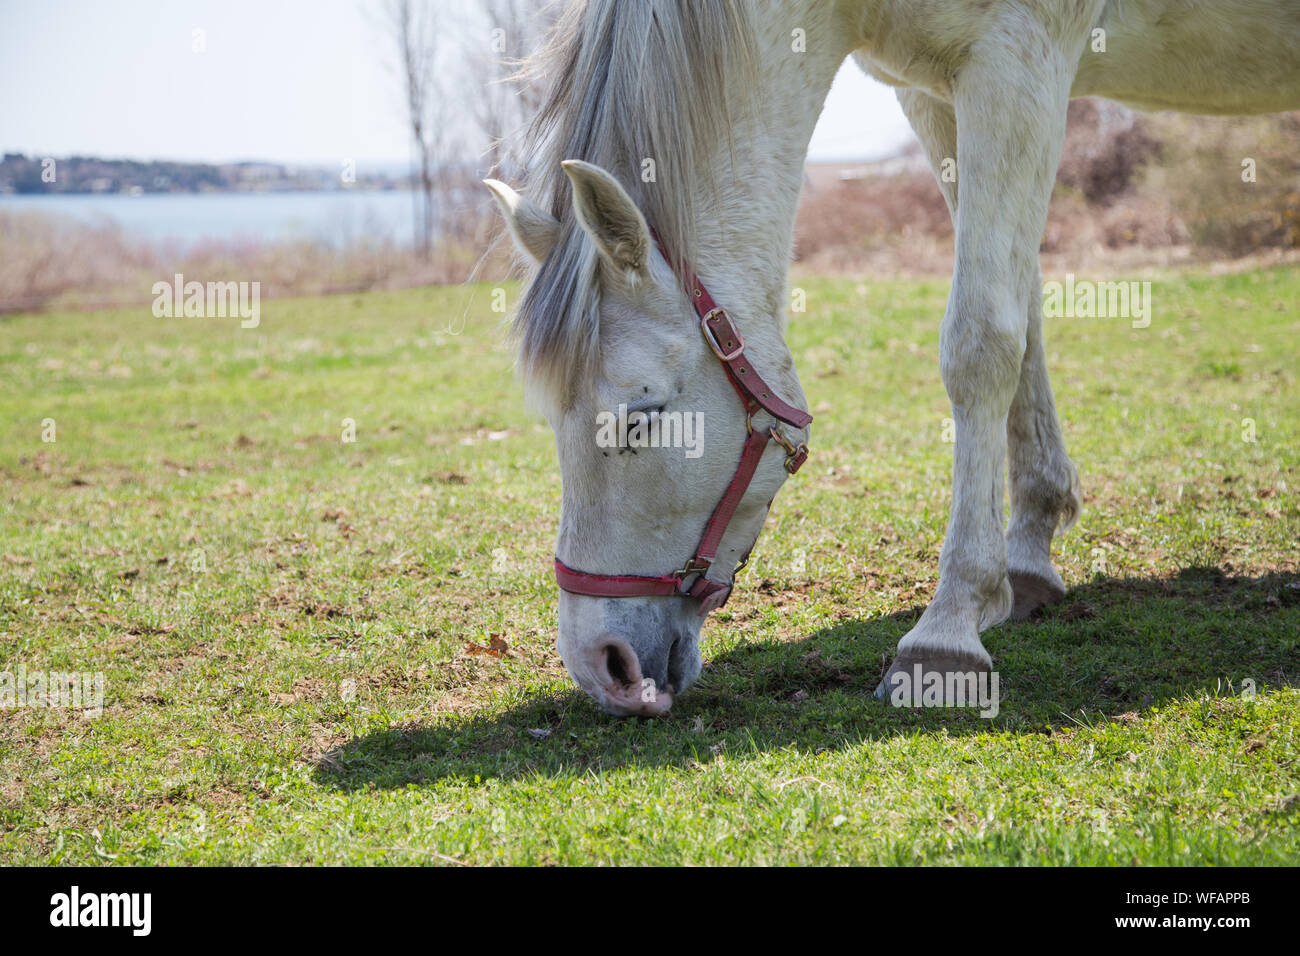 A close up of grazing white horse (Equus ferus caballus) with a red bridle in a rural setting overlooking a small cove, Brunswick, Maine, USA. Stock Photo